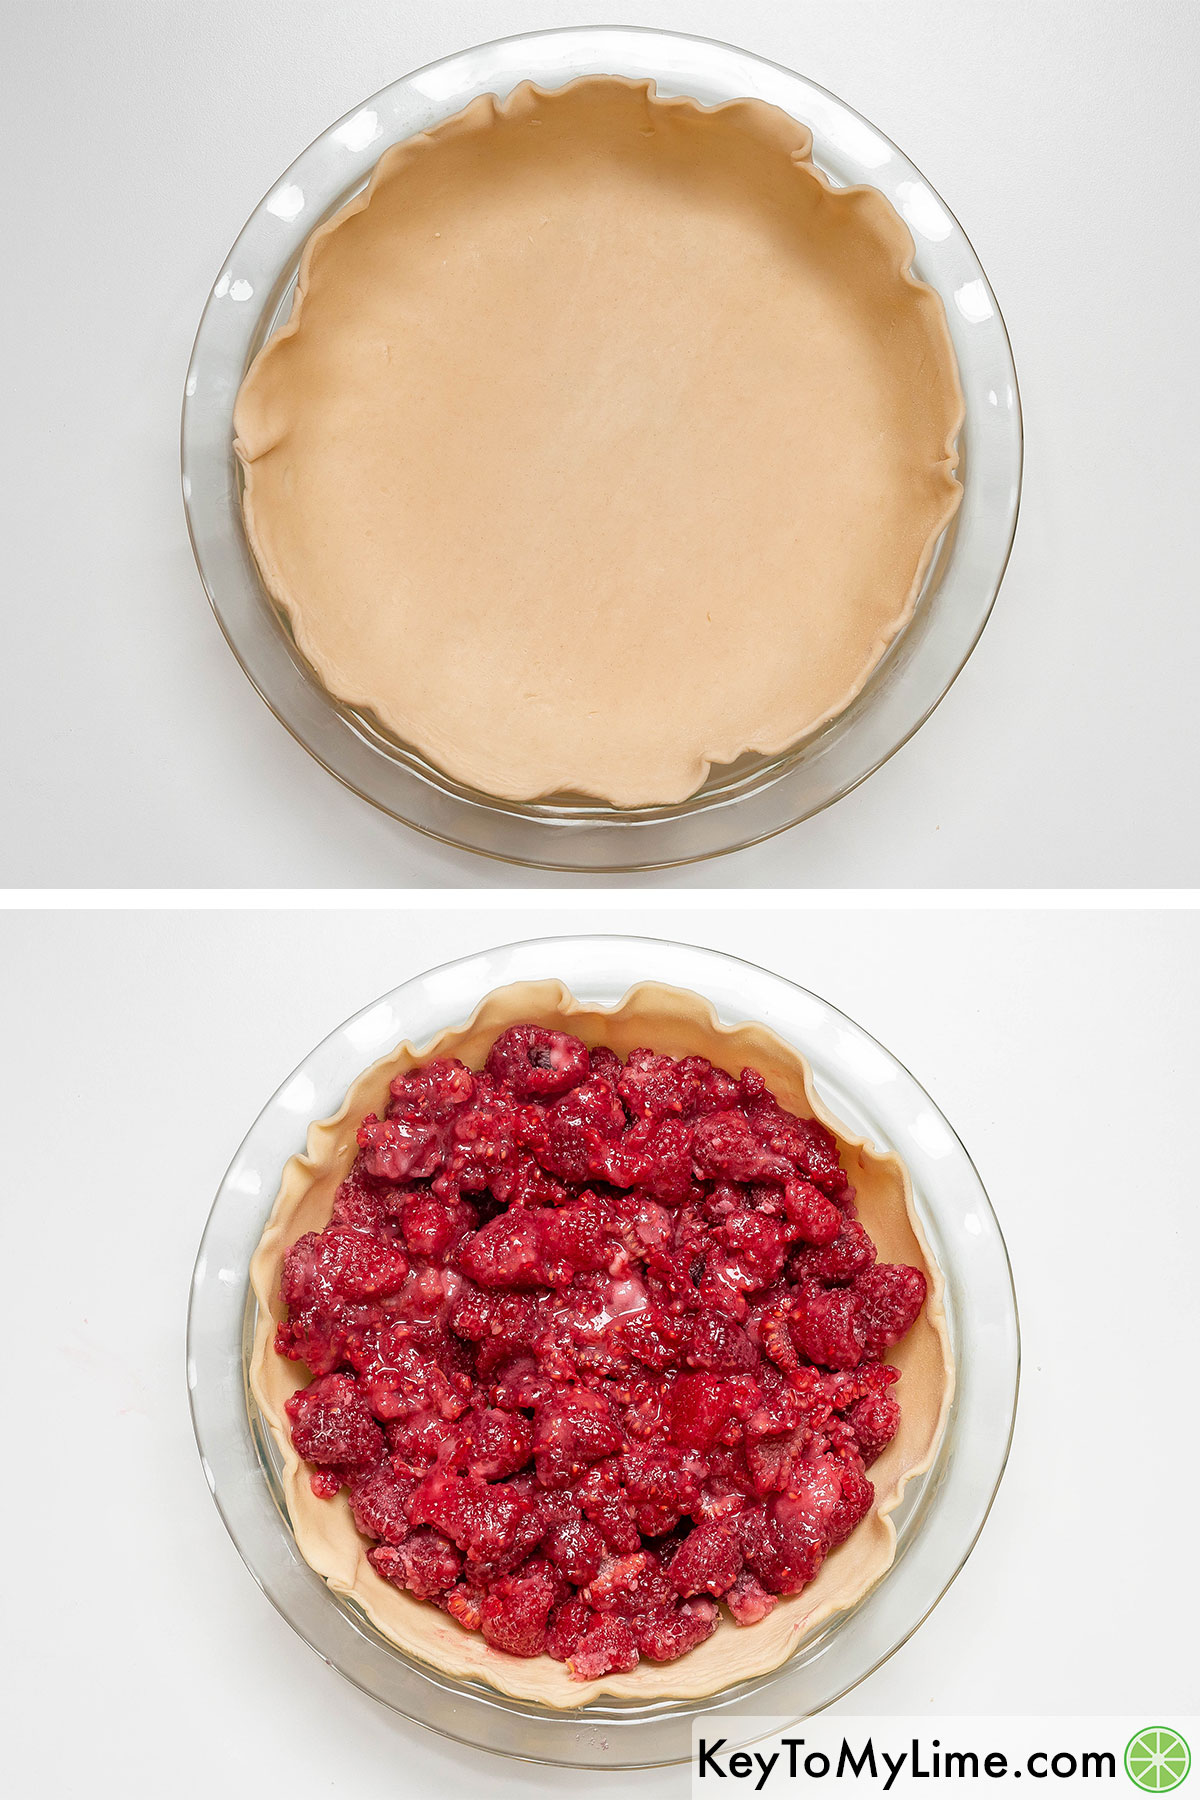 Placing a pie crust to the bottom of the pie plate and then transferring the filling and spreading out evenly.